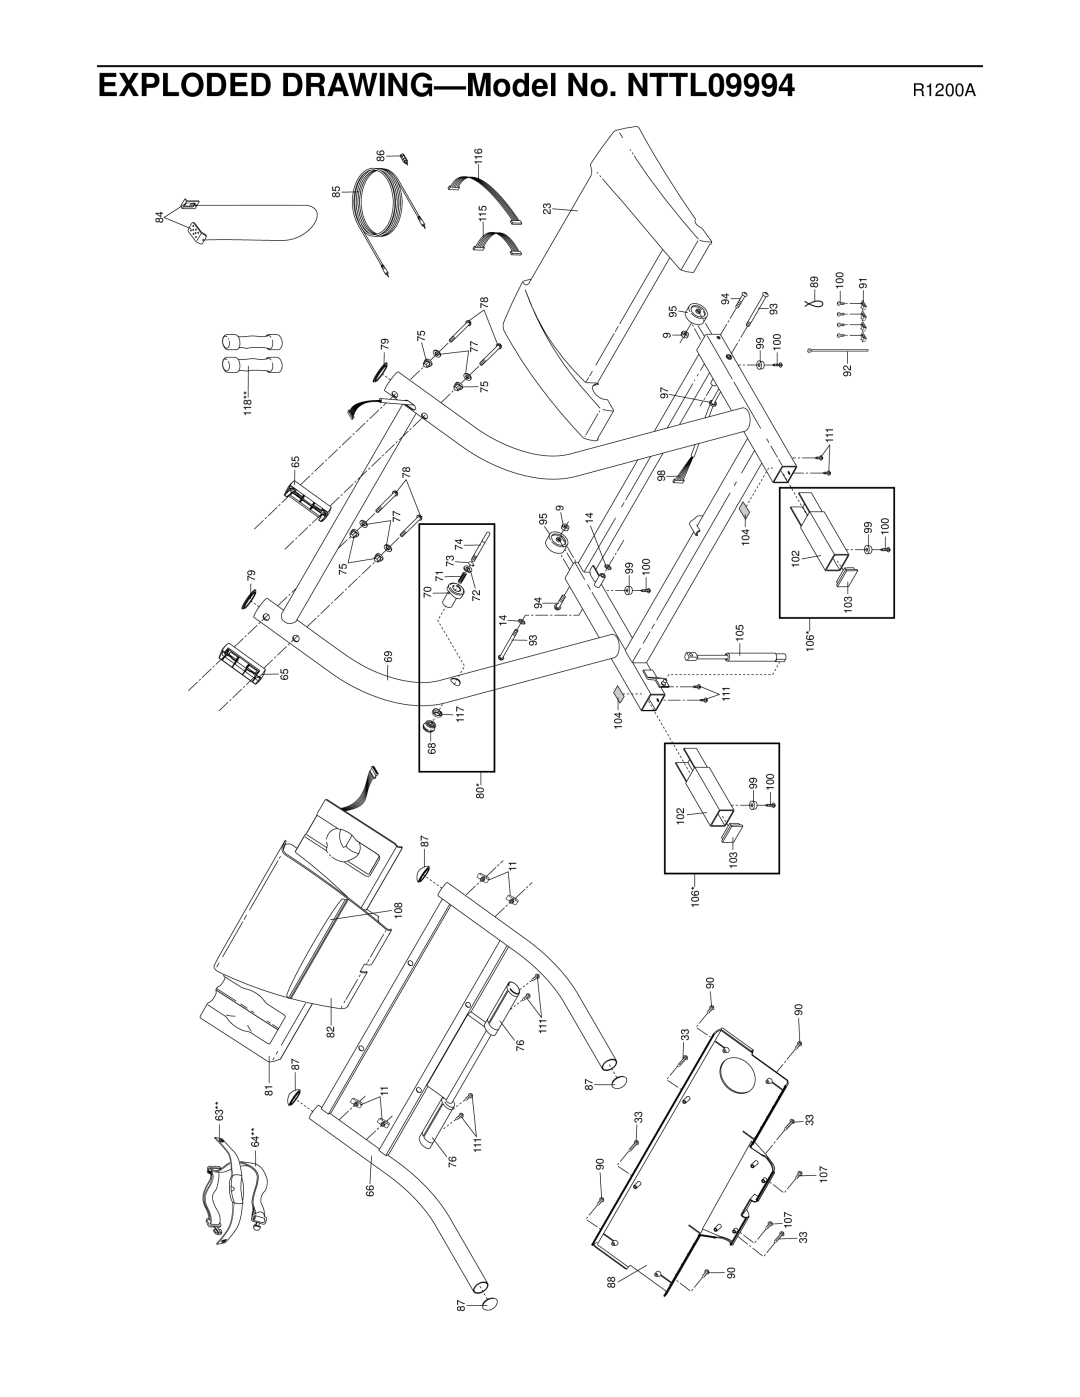 NordicTrack user manual Exploded Drawing, Model No. NTTL09994 